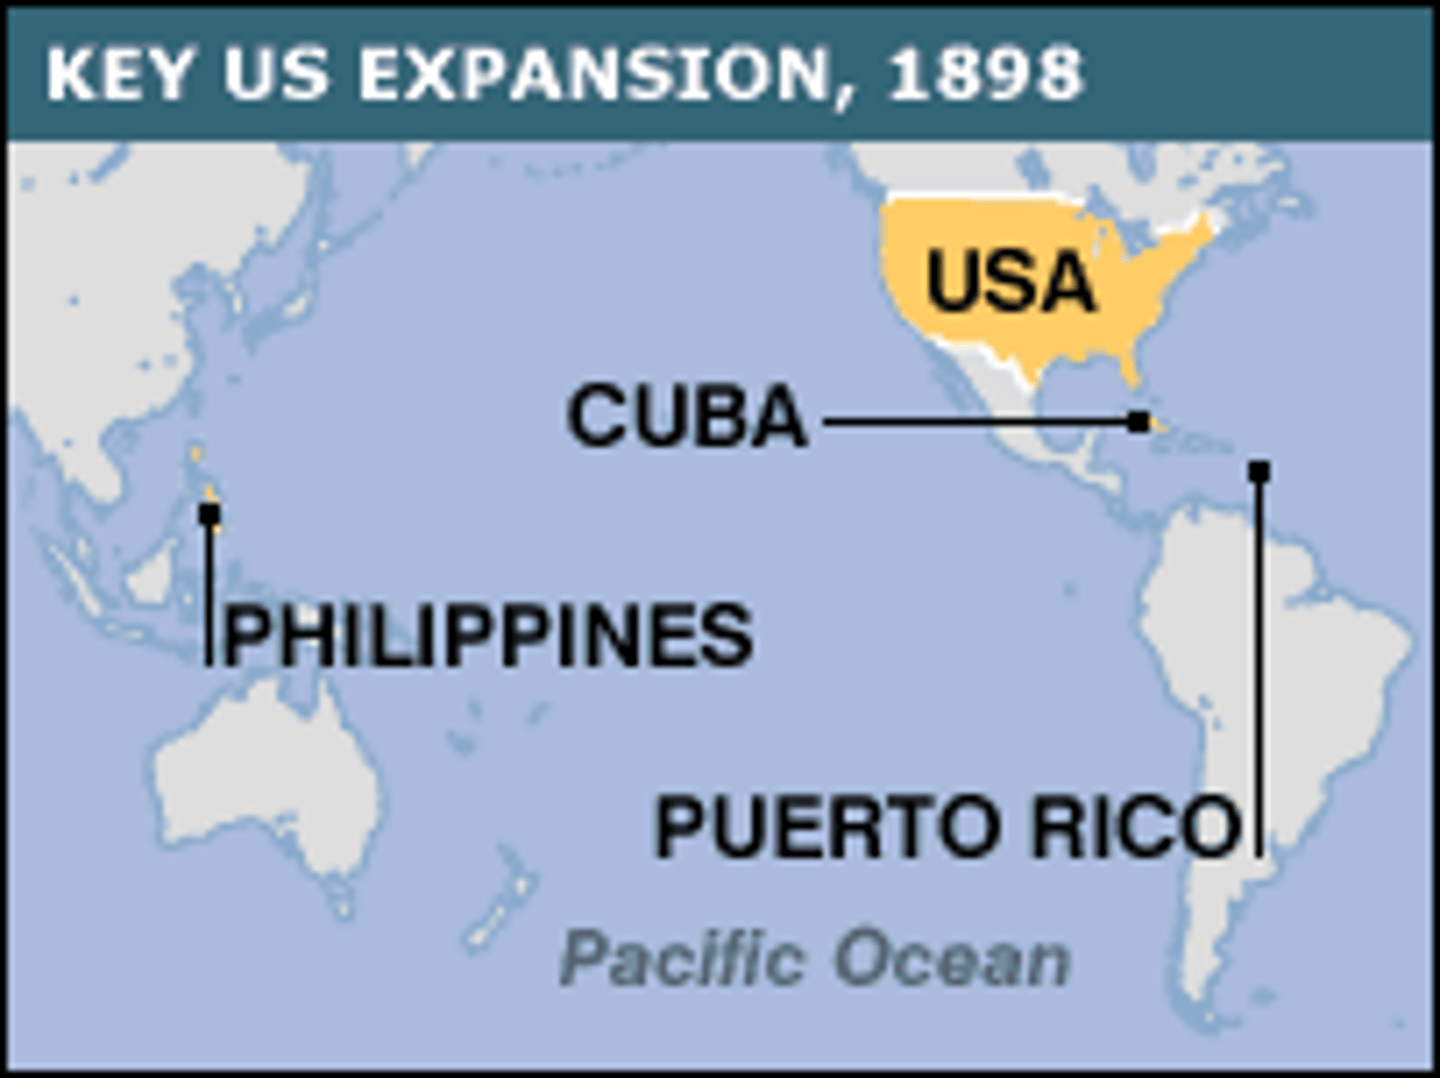 <p>A conflict fought between Spain and the United States in 1898. The U.S. defeated Spain and gained the Philippines, Guam, and Puerto Rico.</p>